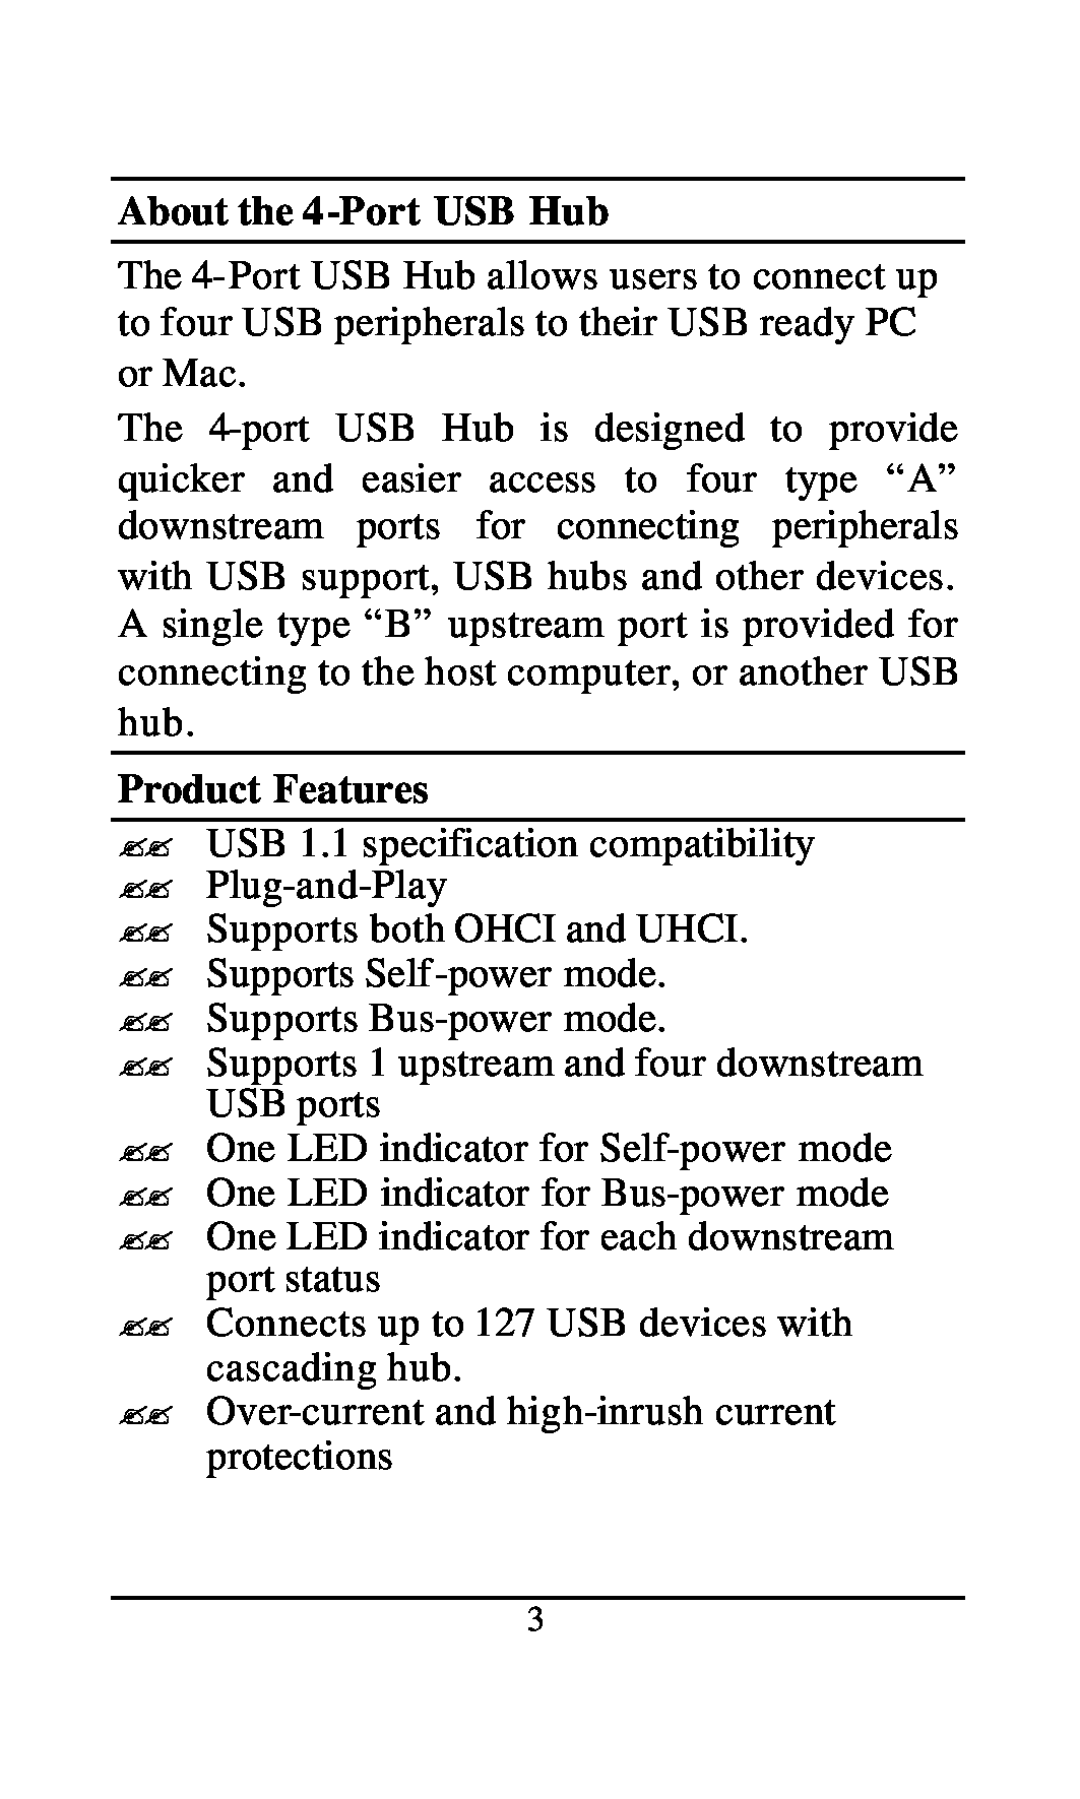 D-Link DU-H4 user manual About the 4-Port USB Hub, Product Features 